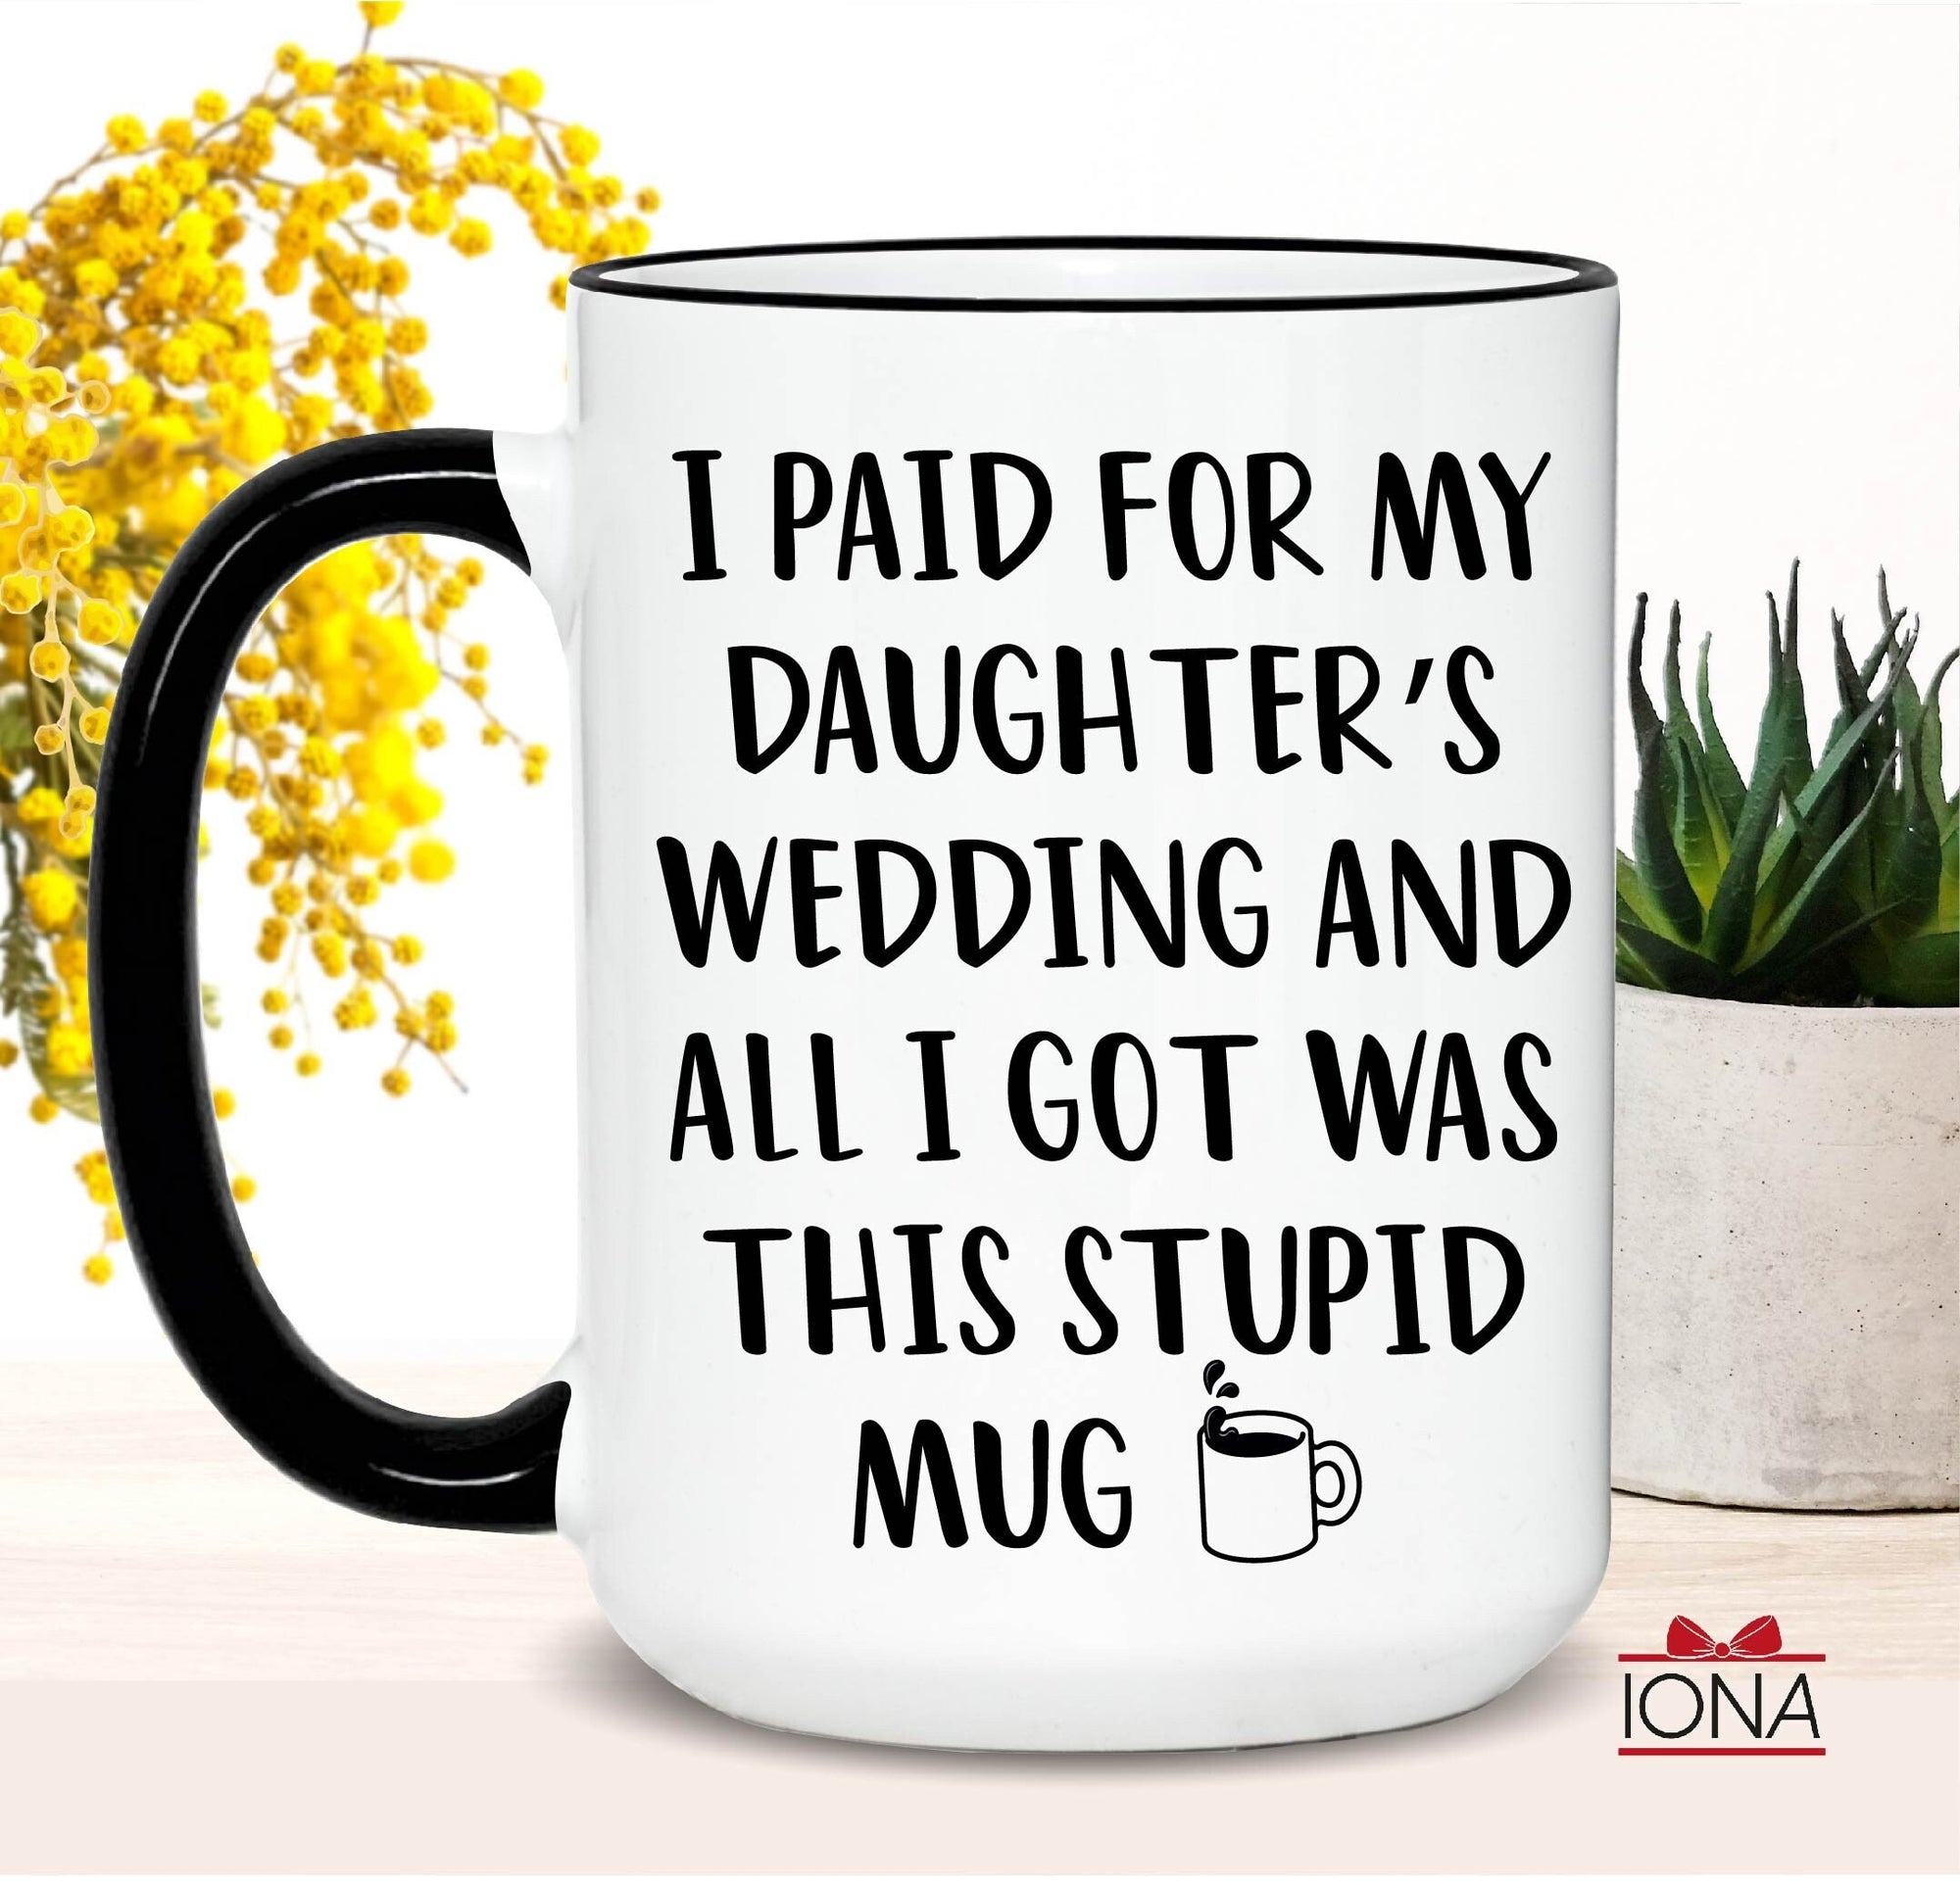 Funny Father Of Bride Gift, Wedding Gift For Dad, Funny Father Gift Dad Gift, I Paid For My Daughter's Wedding All I Got Was This Stupid Mug